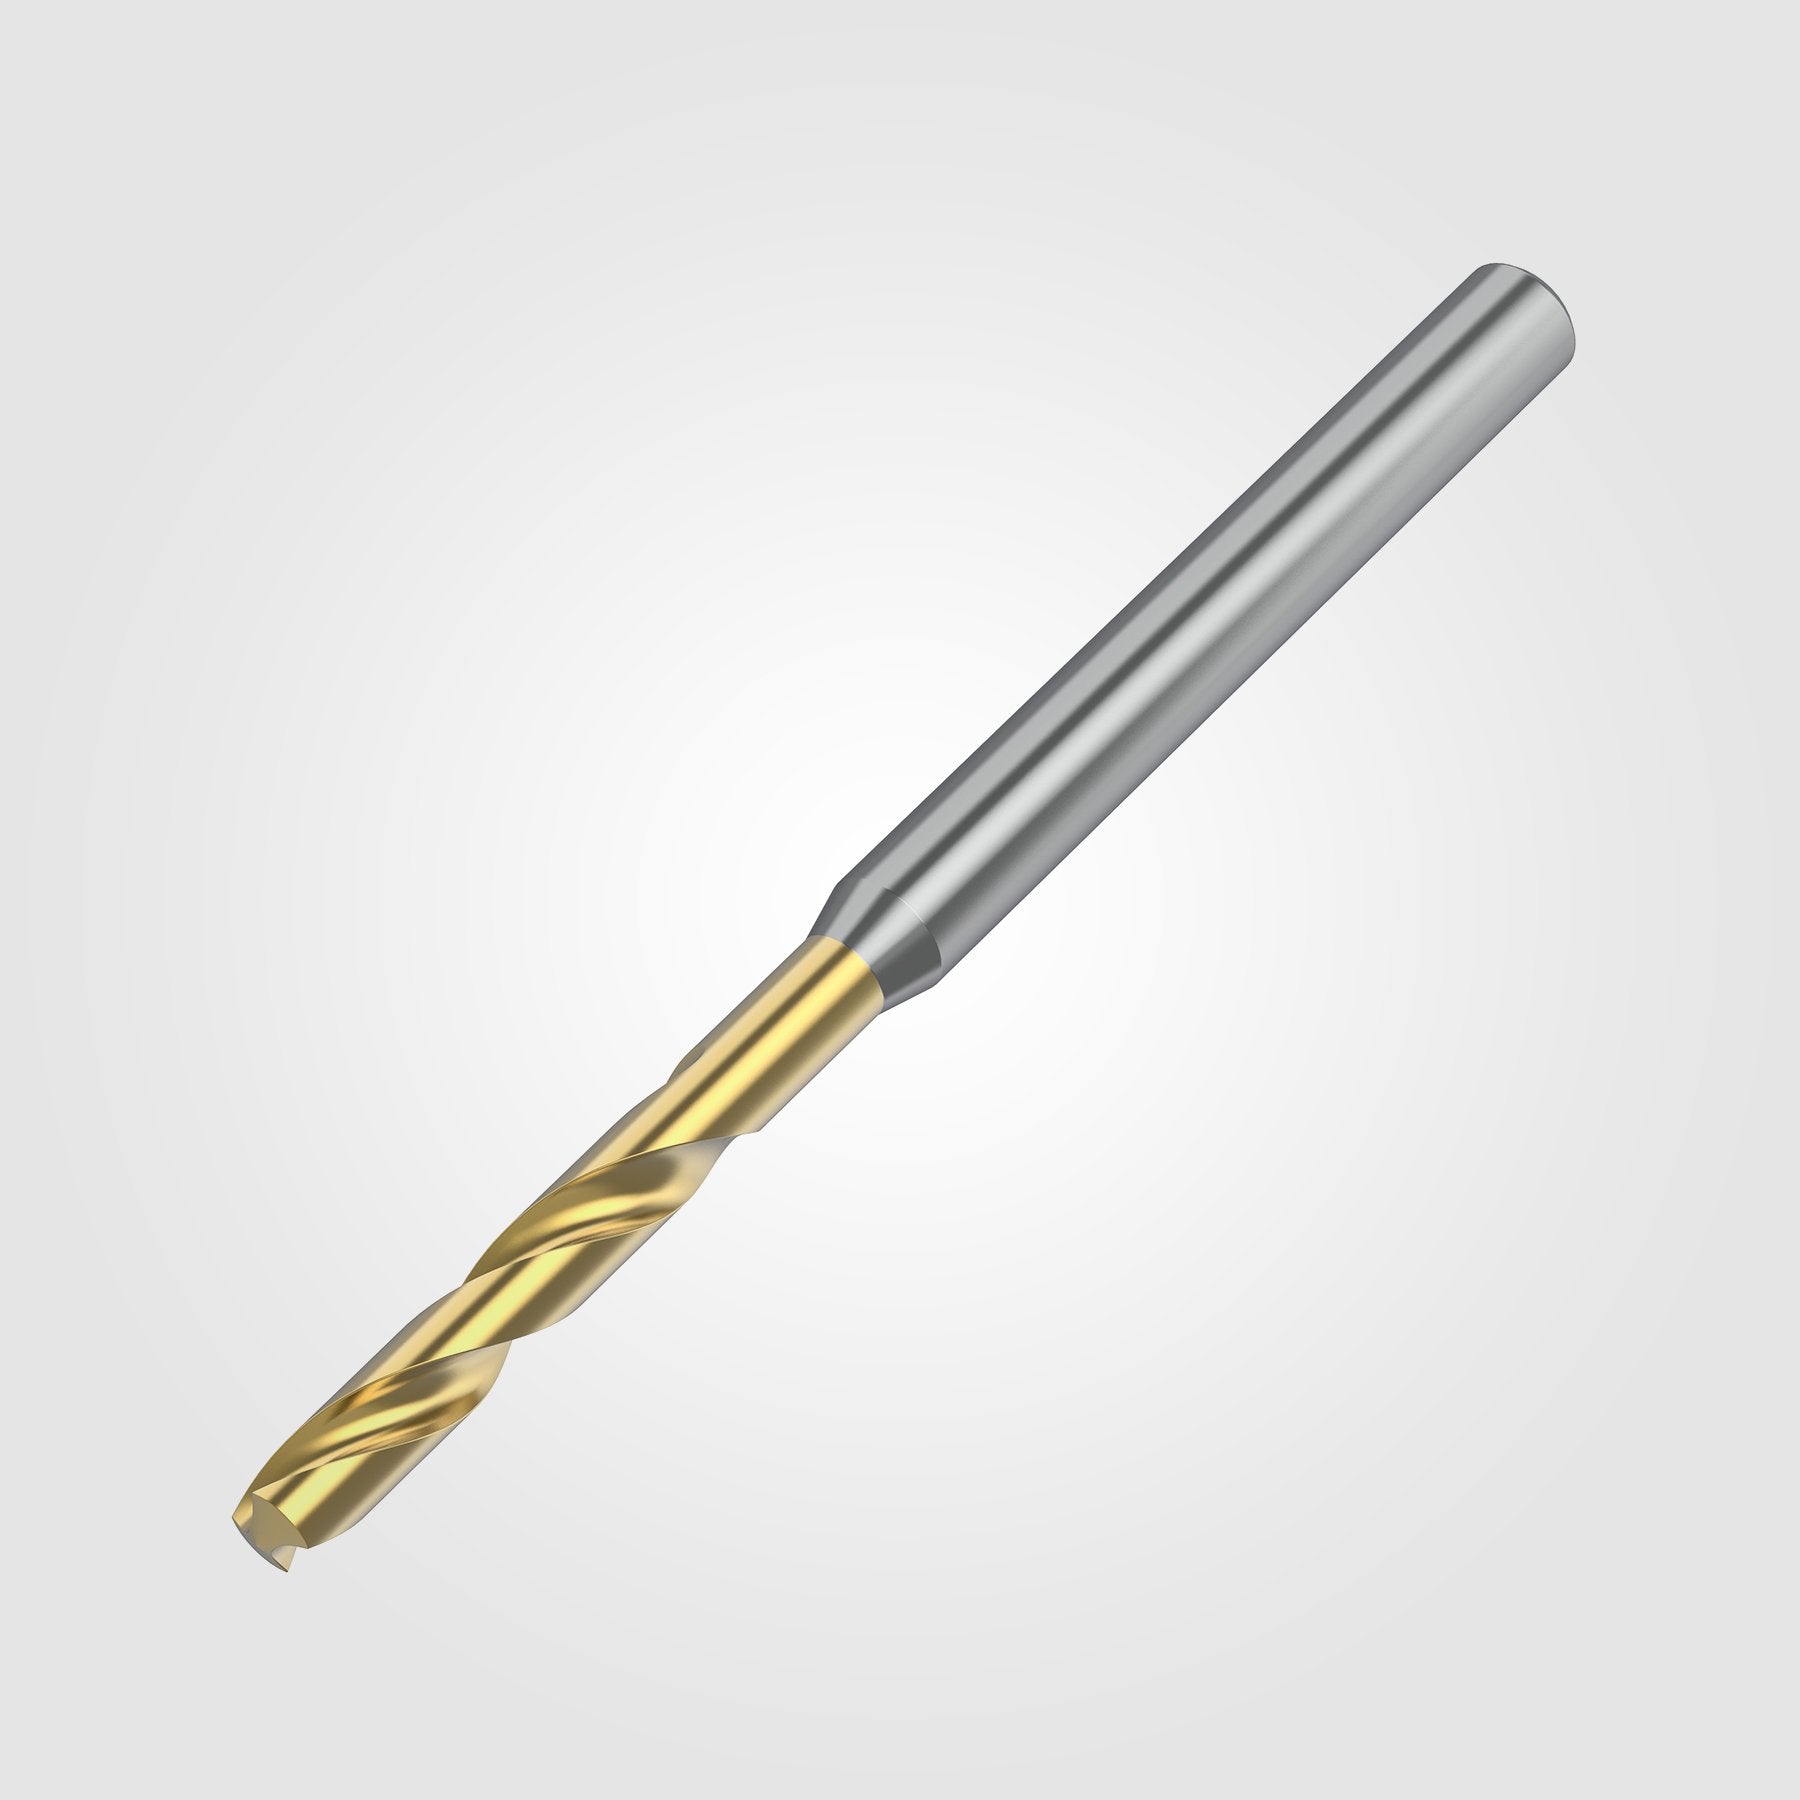 GOdrill (THROUGH COOLANT) | 9.4mm / .3701" / 3xD | SOLID CARBIDE DRILL | 4151194